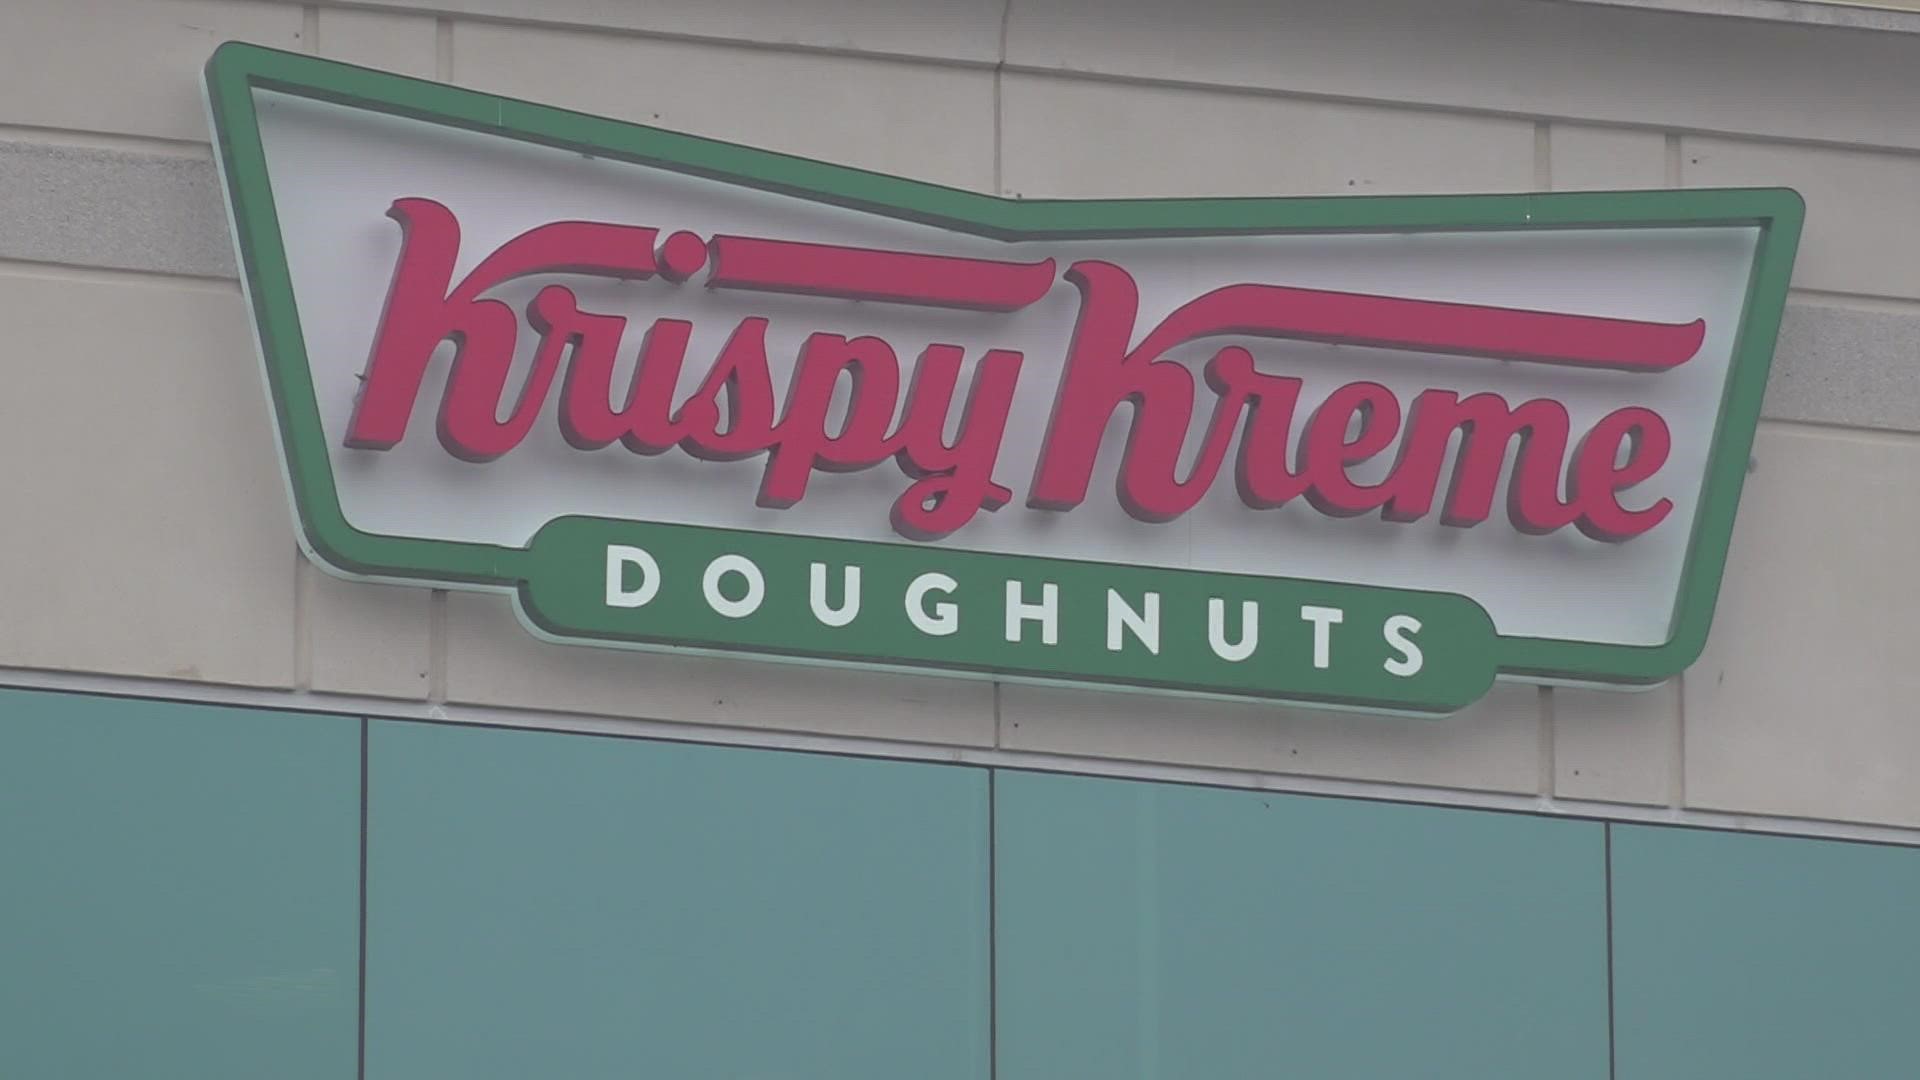 Doughnut maker Krispy Kreme will create 180 new jobs over the next three to four years in Forsyth County.